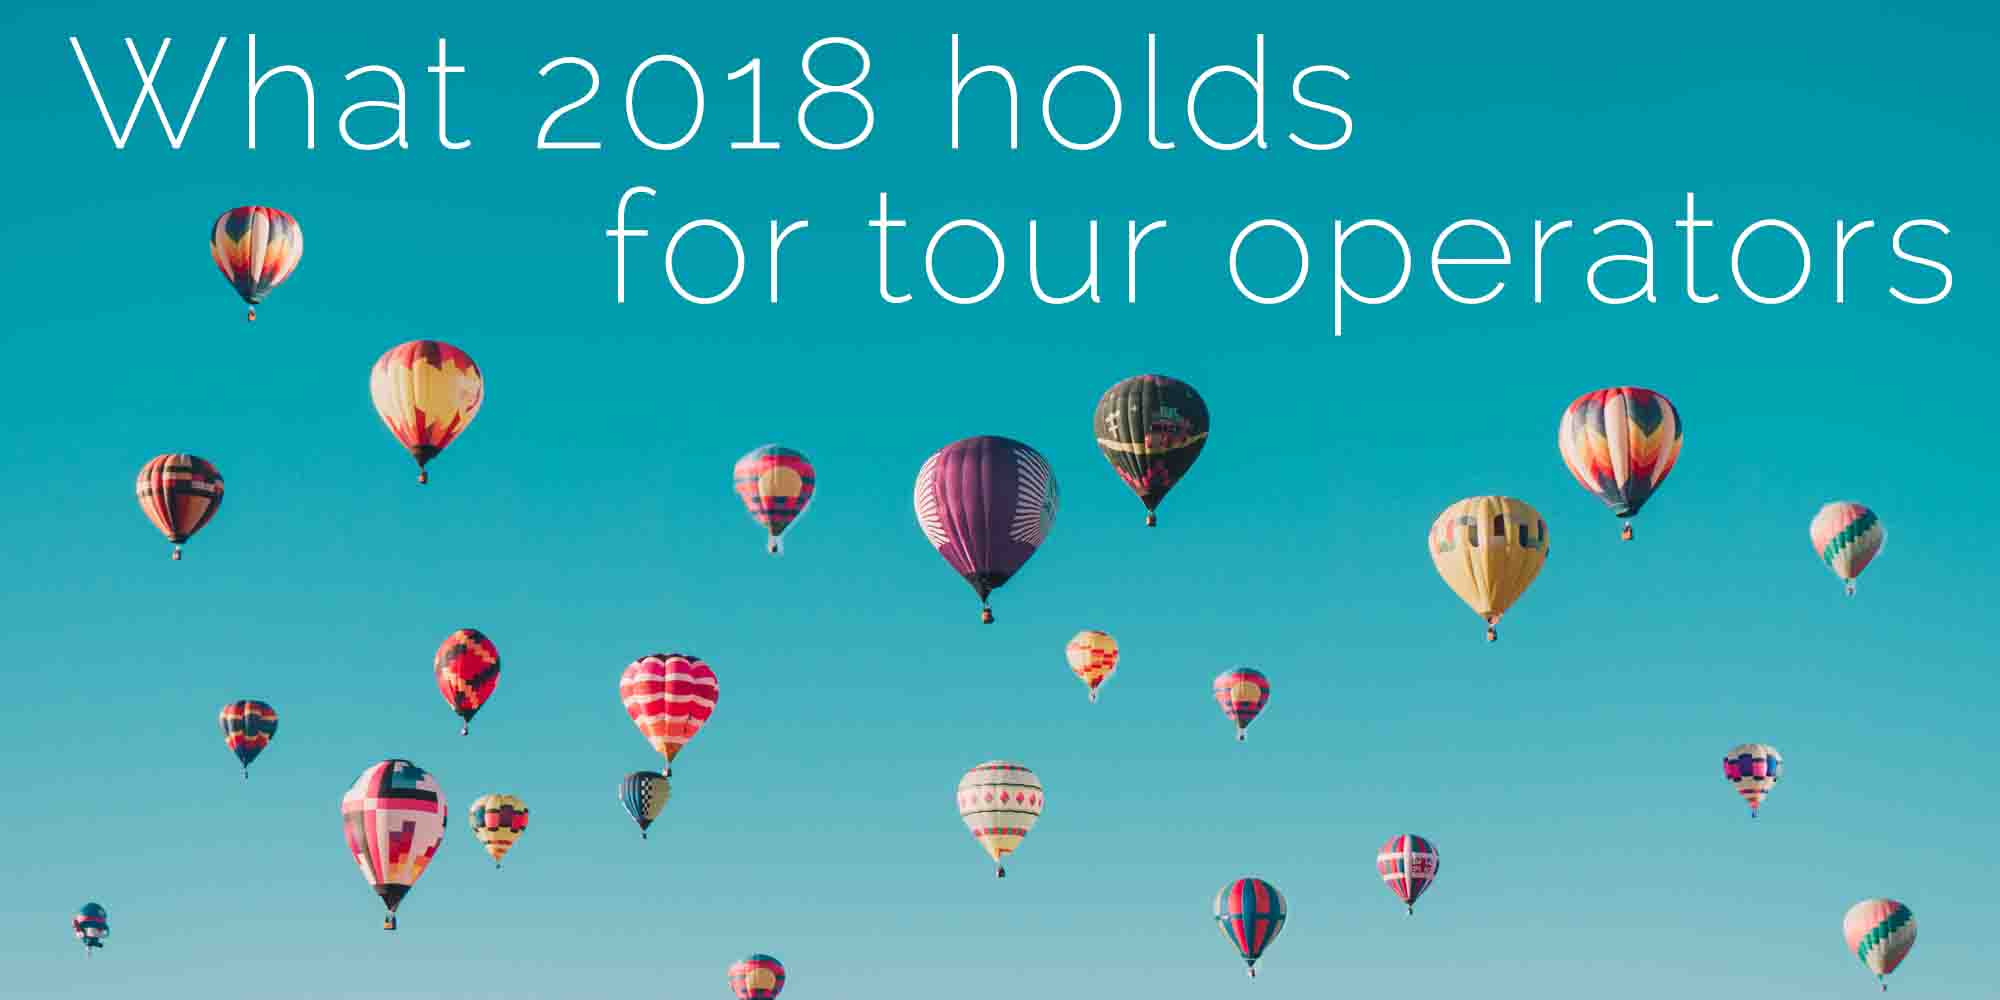 What 2018 holds for tour operators